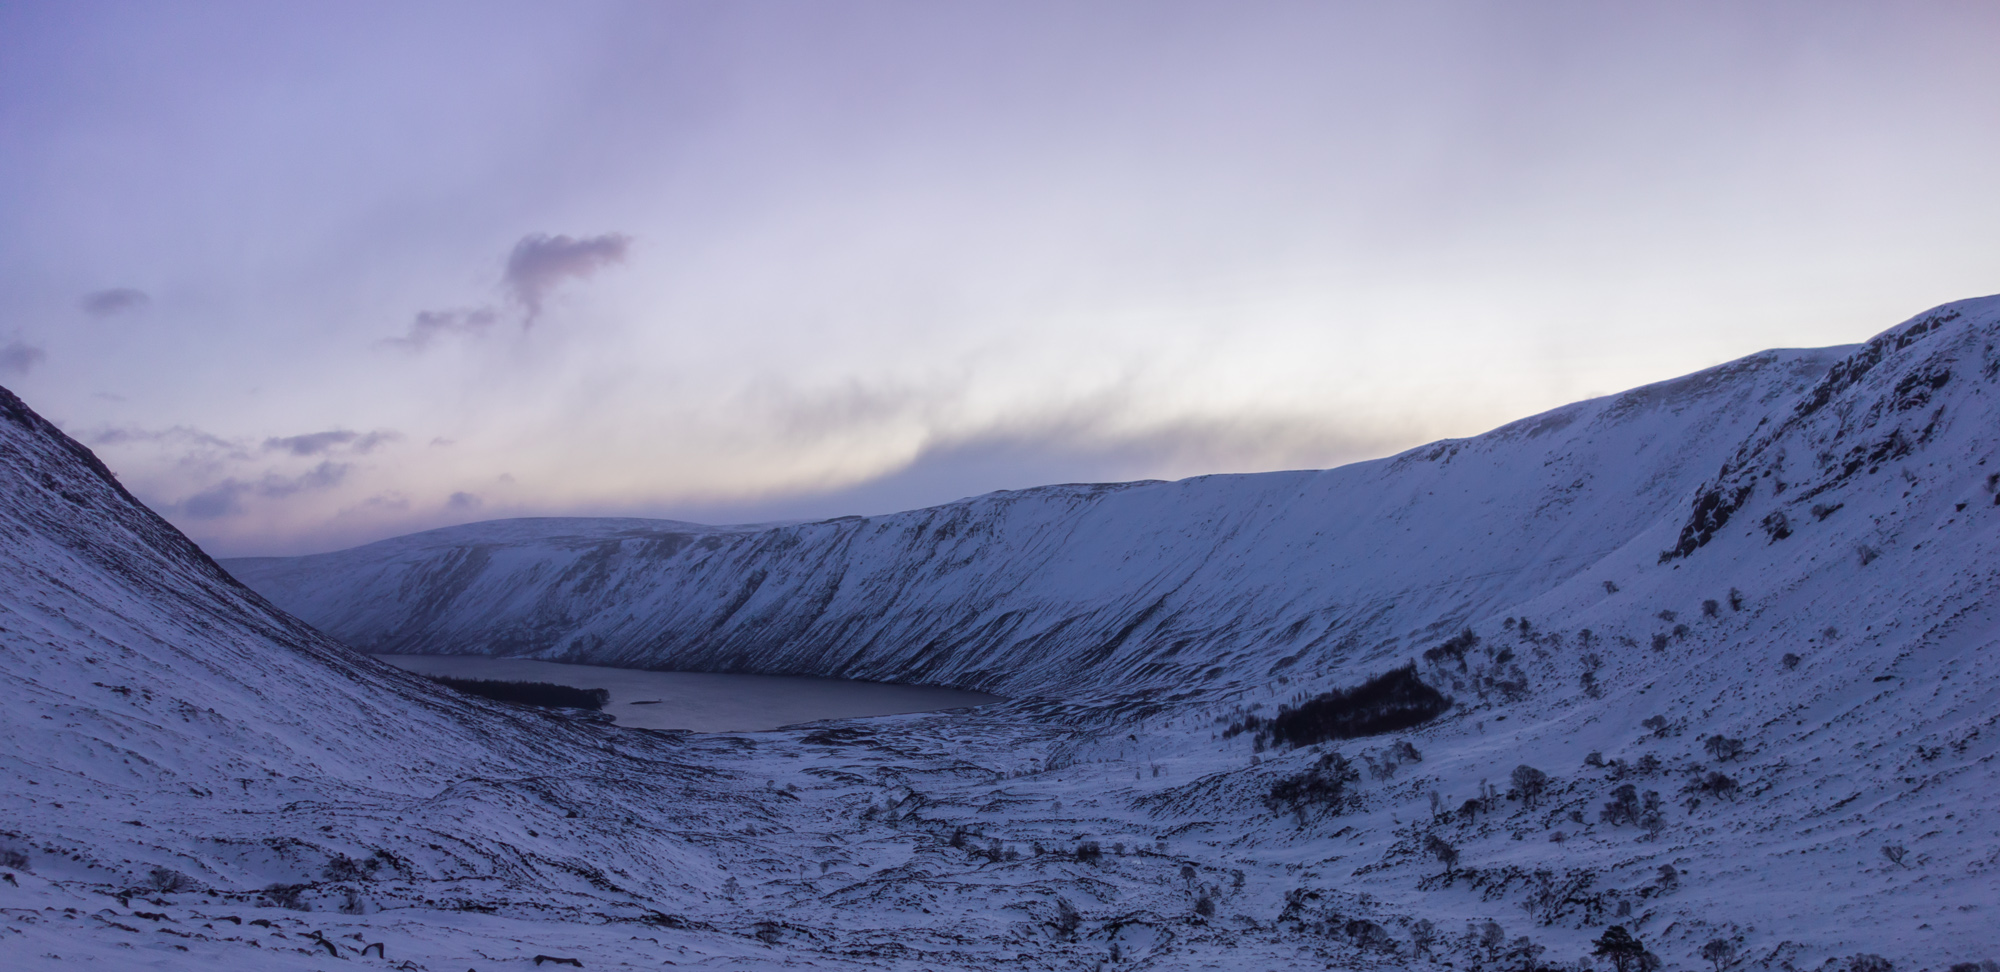 Before the weather closed in we were treated to wonderful dawn light over Glen Muick